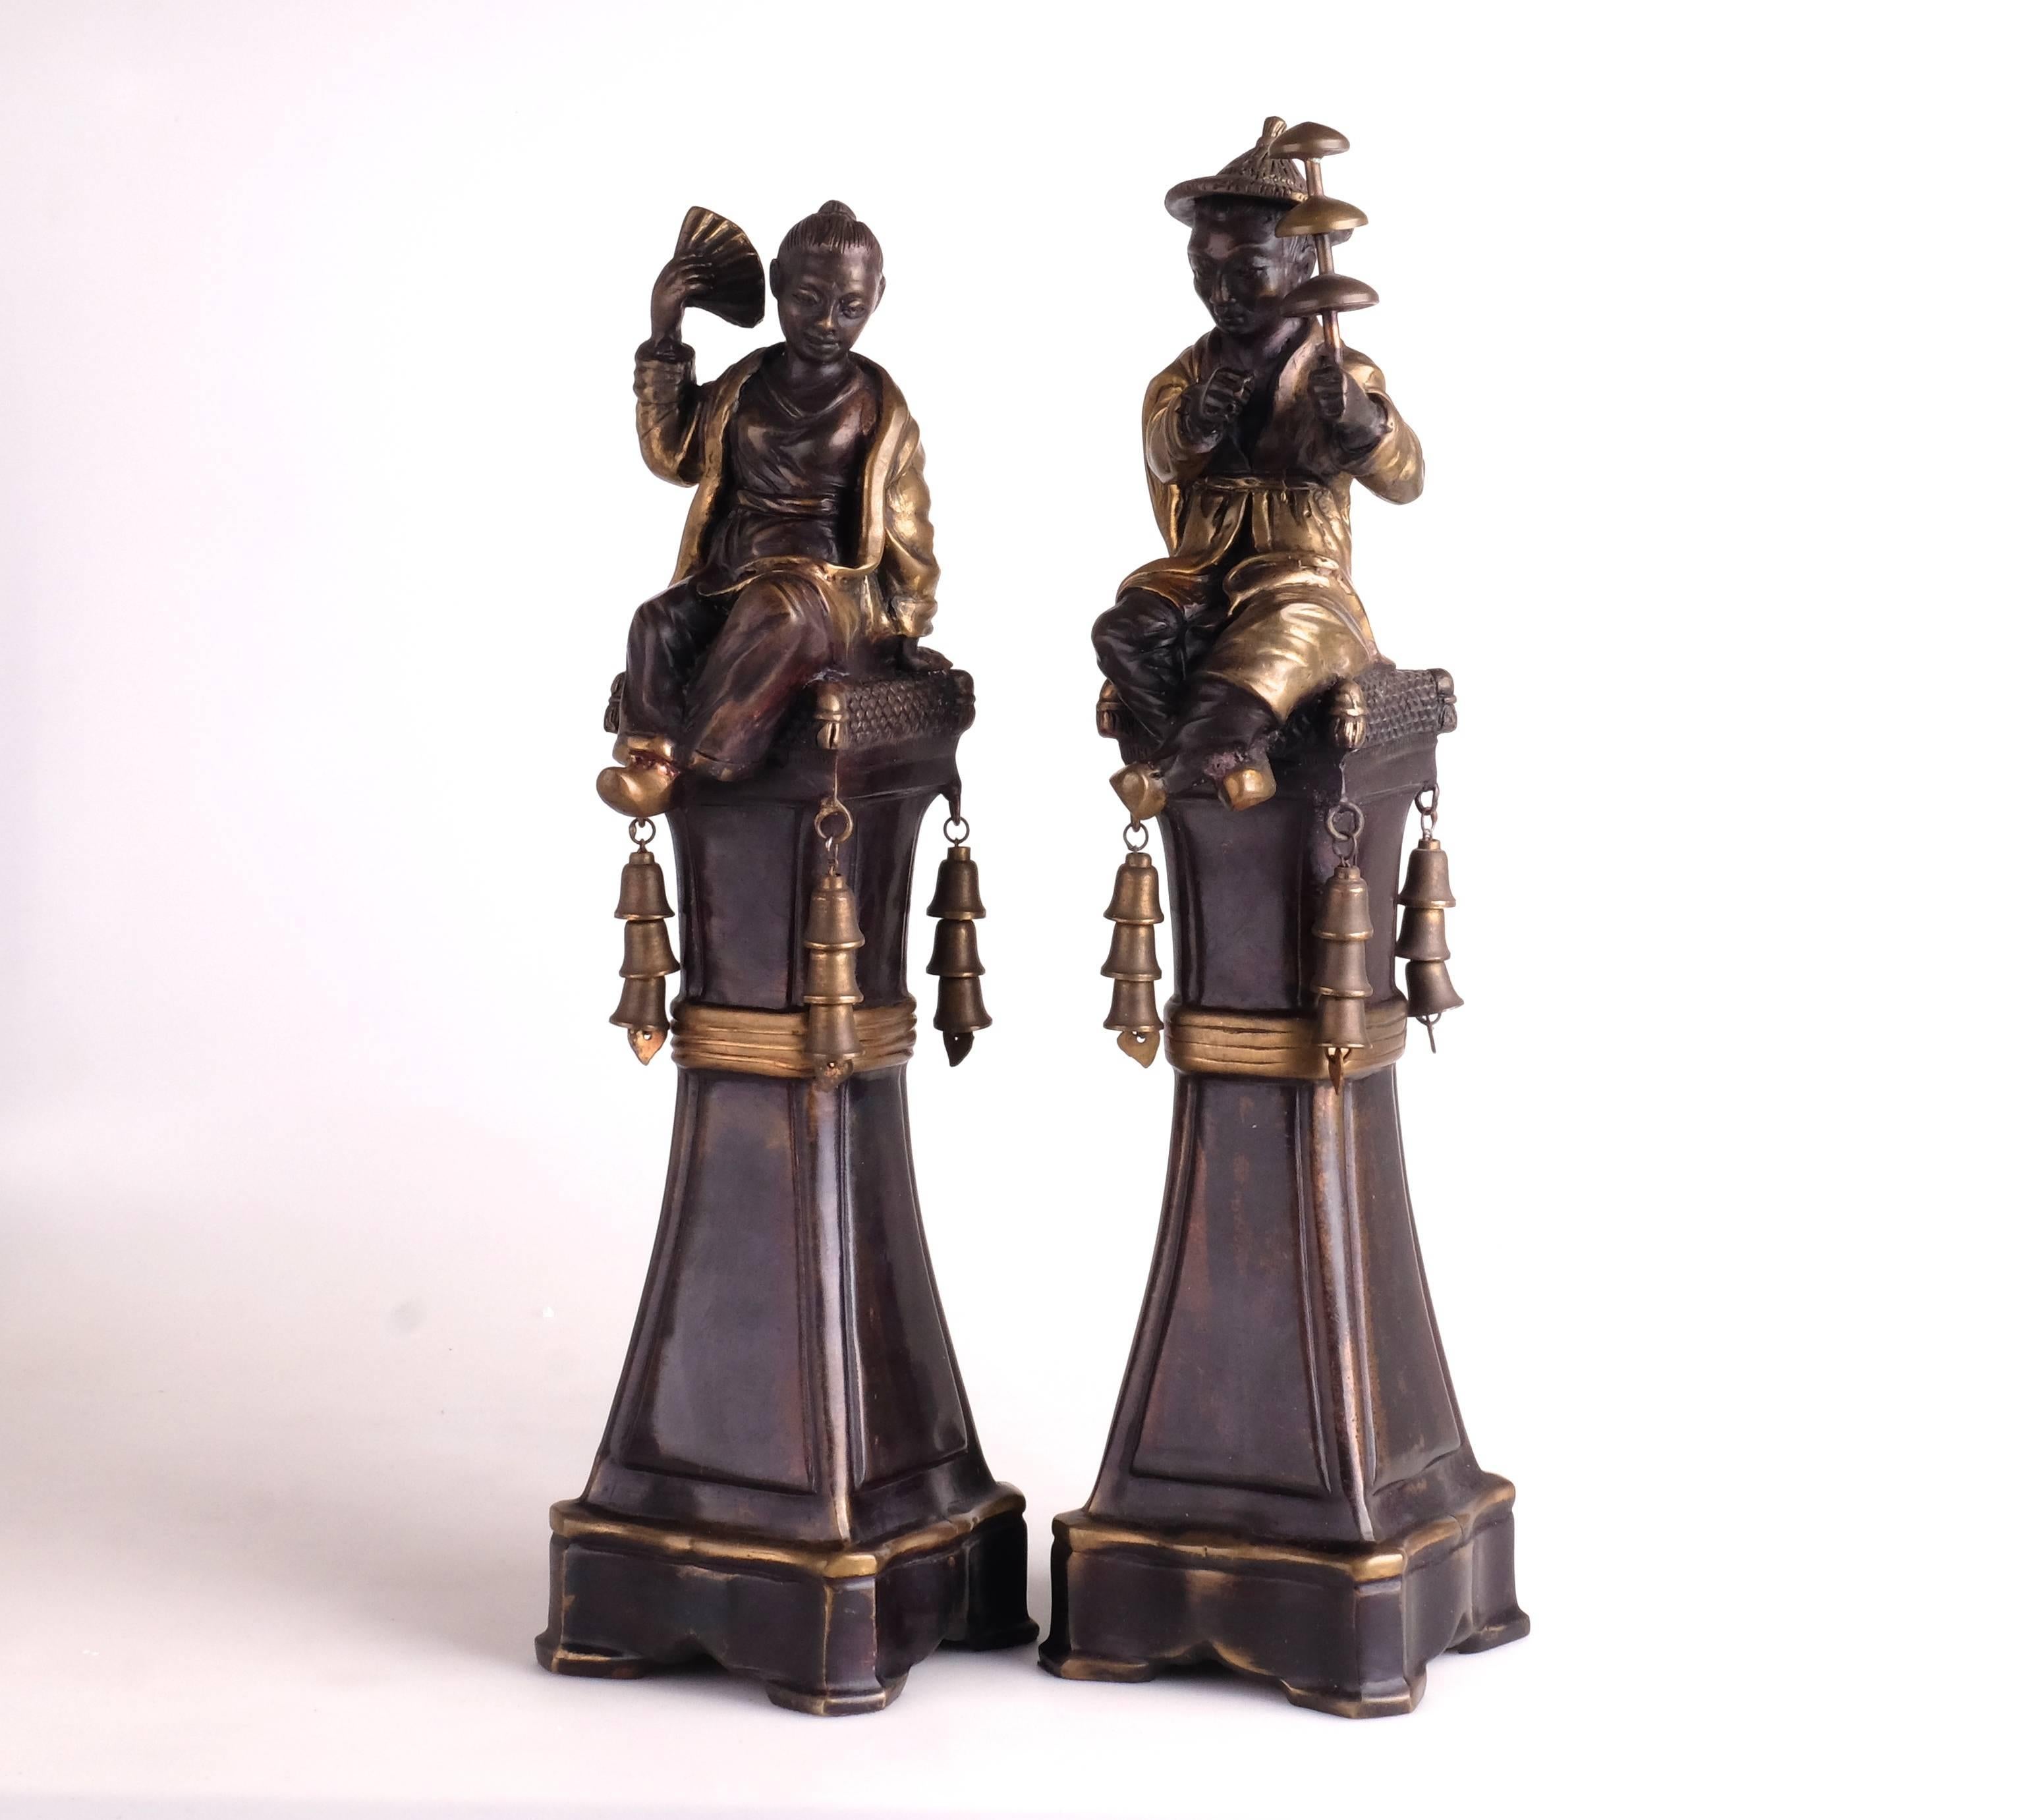 Italian bronze Chinese figures with gild details on a statue from the 1940s.